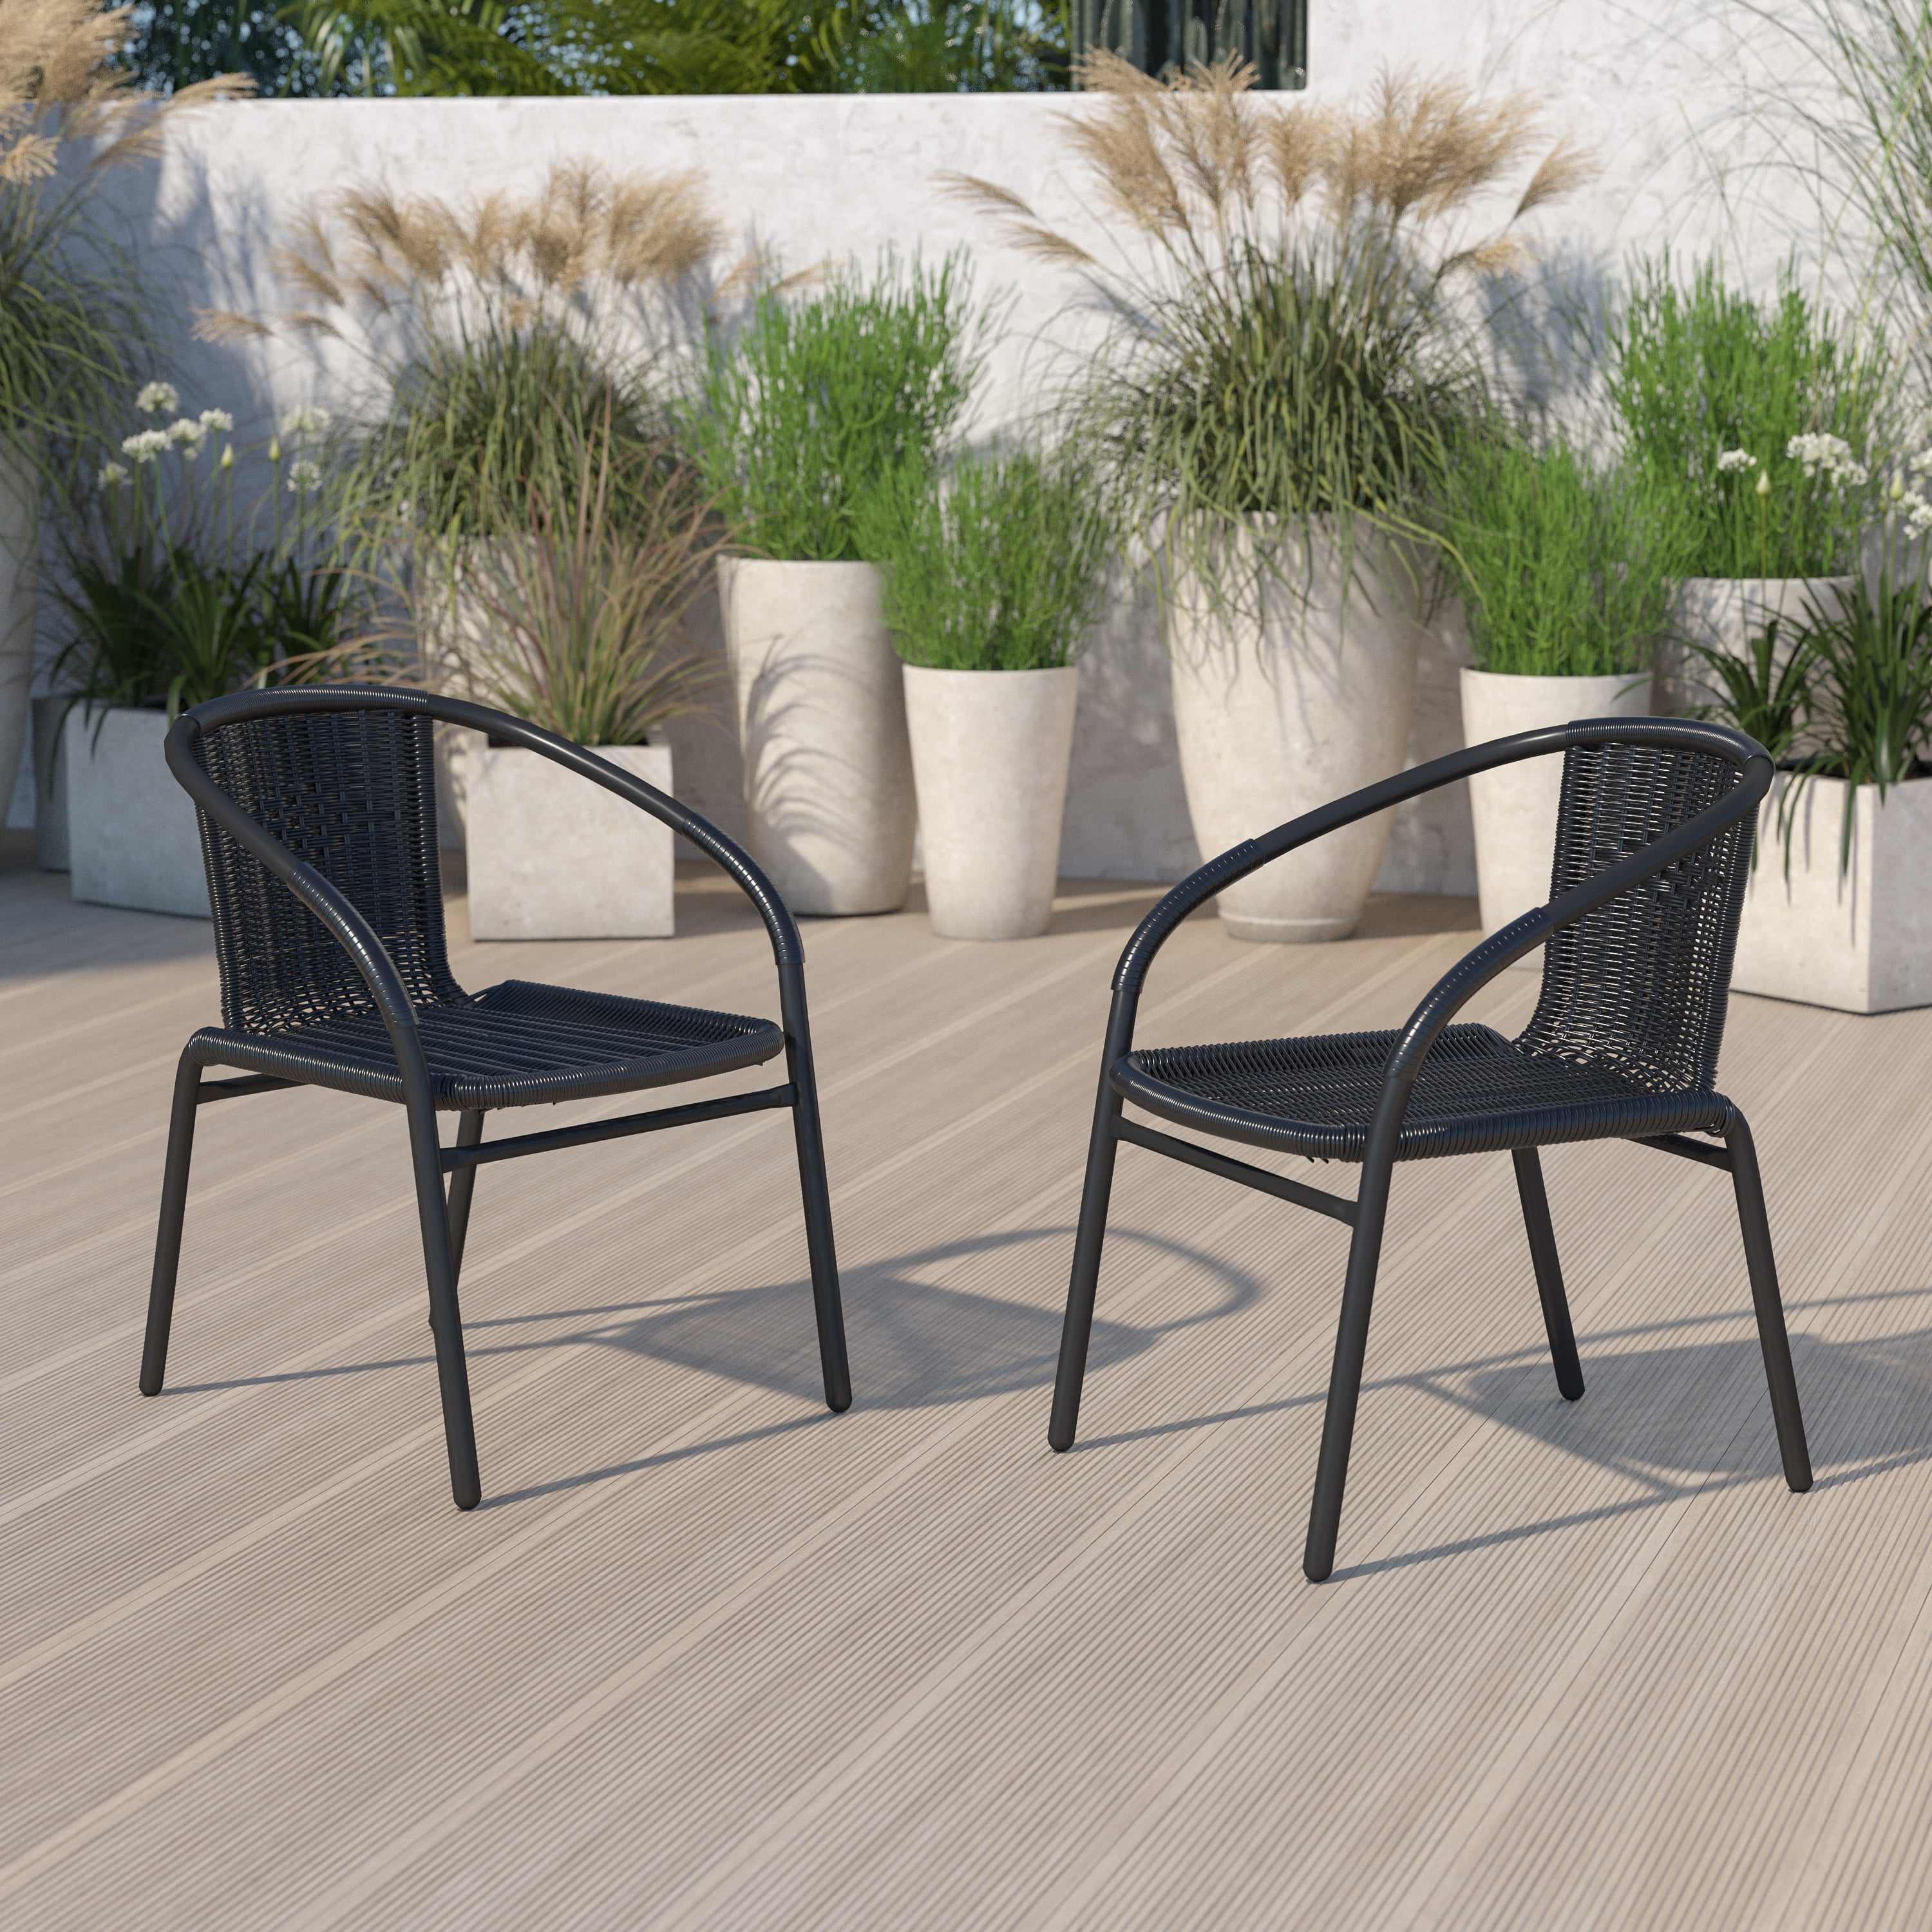 BLACK CAFÉ RESTAURANT INDOOR OUTDOOR STACK CHAIR WITH CURVED BACK 